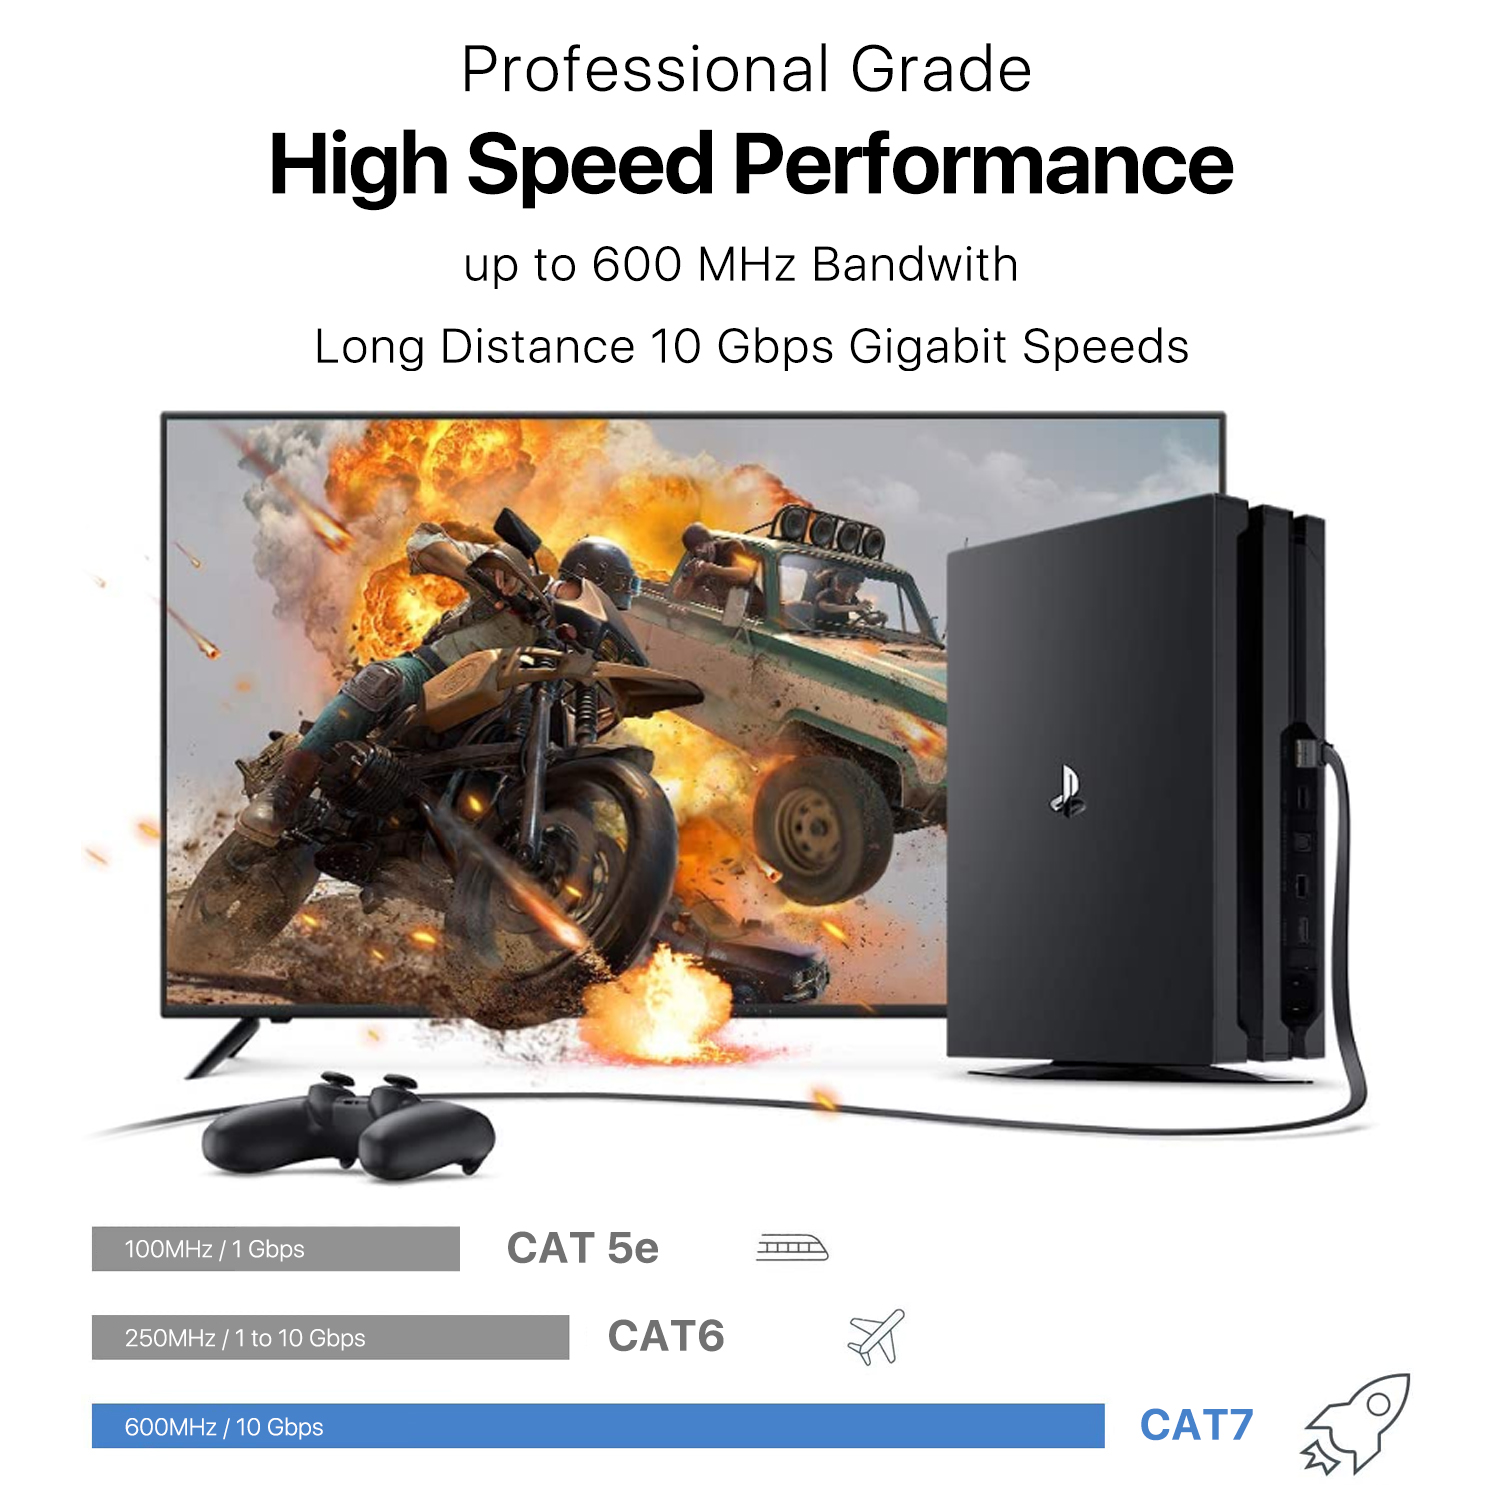 Flexible and Durable Cat7 Cable: support high bandwidth connection of 10 Gbps and fastest up to 600 MHz high-speed data transfer for server applications, cloud computing, video surveillance and online high definition Full HD 1080P 4K UHD Ultra HD video streaming, online gaming, etc